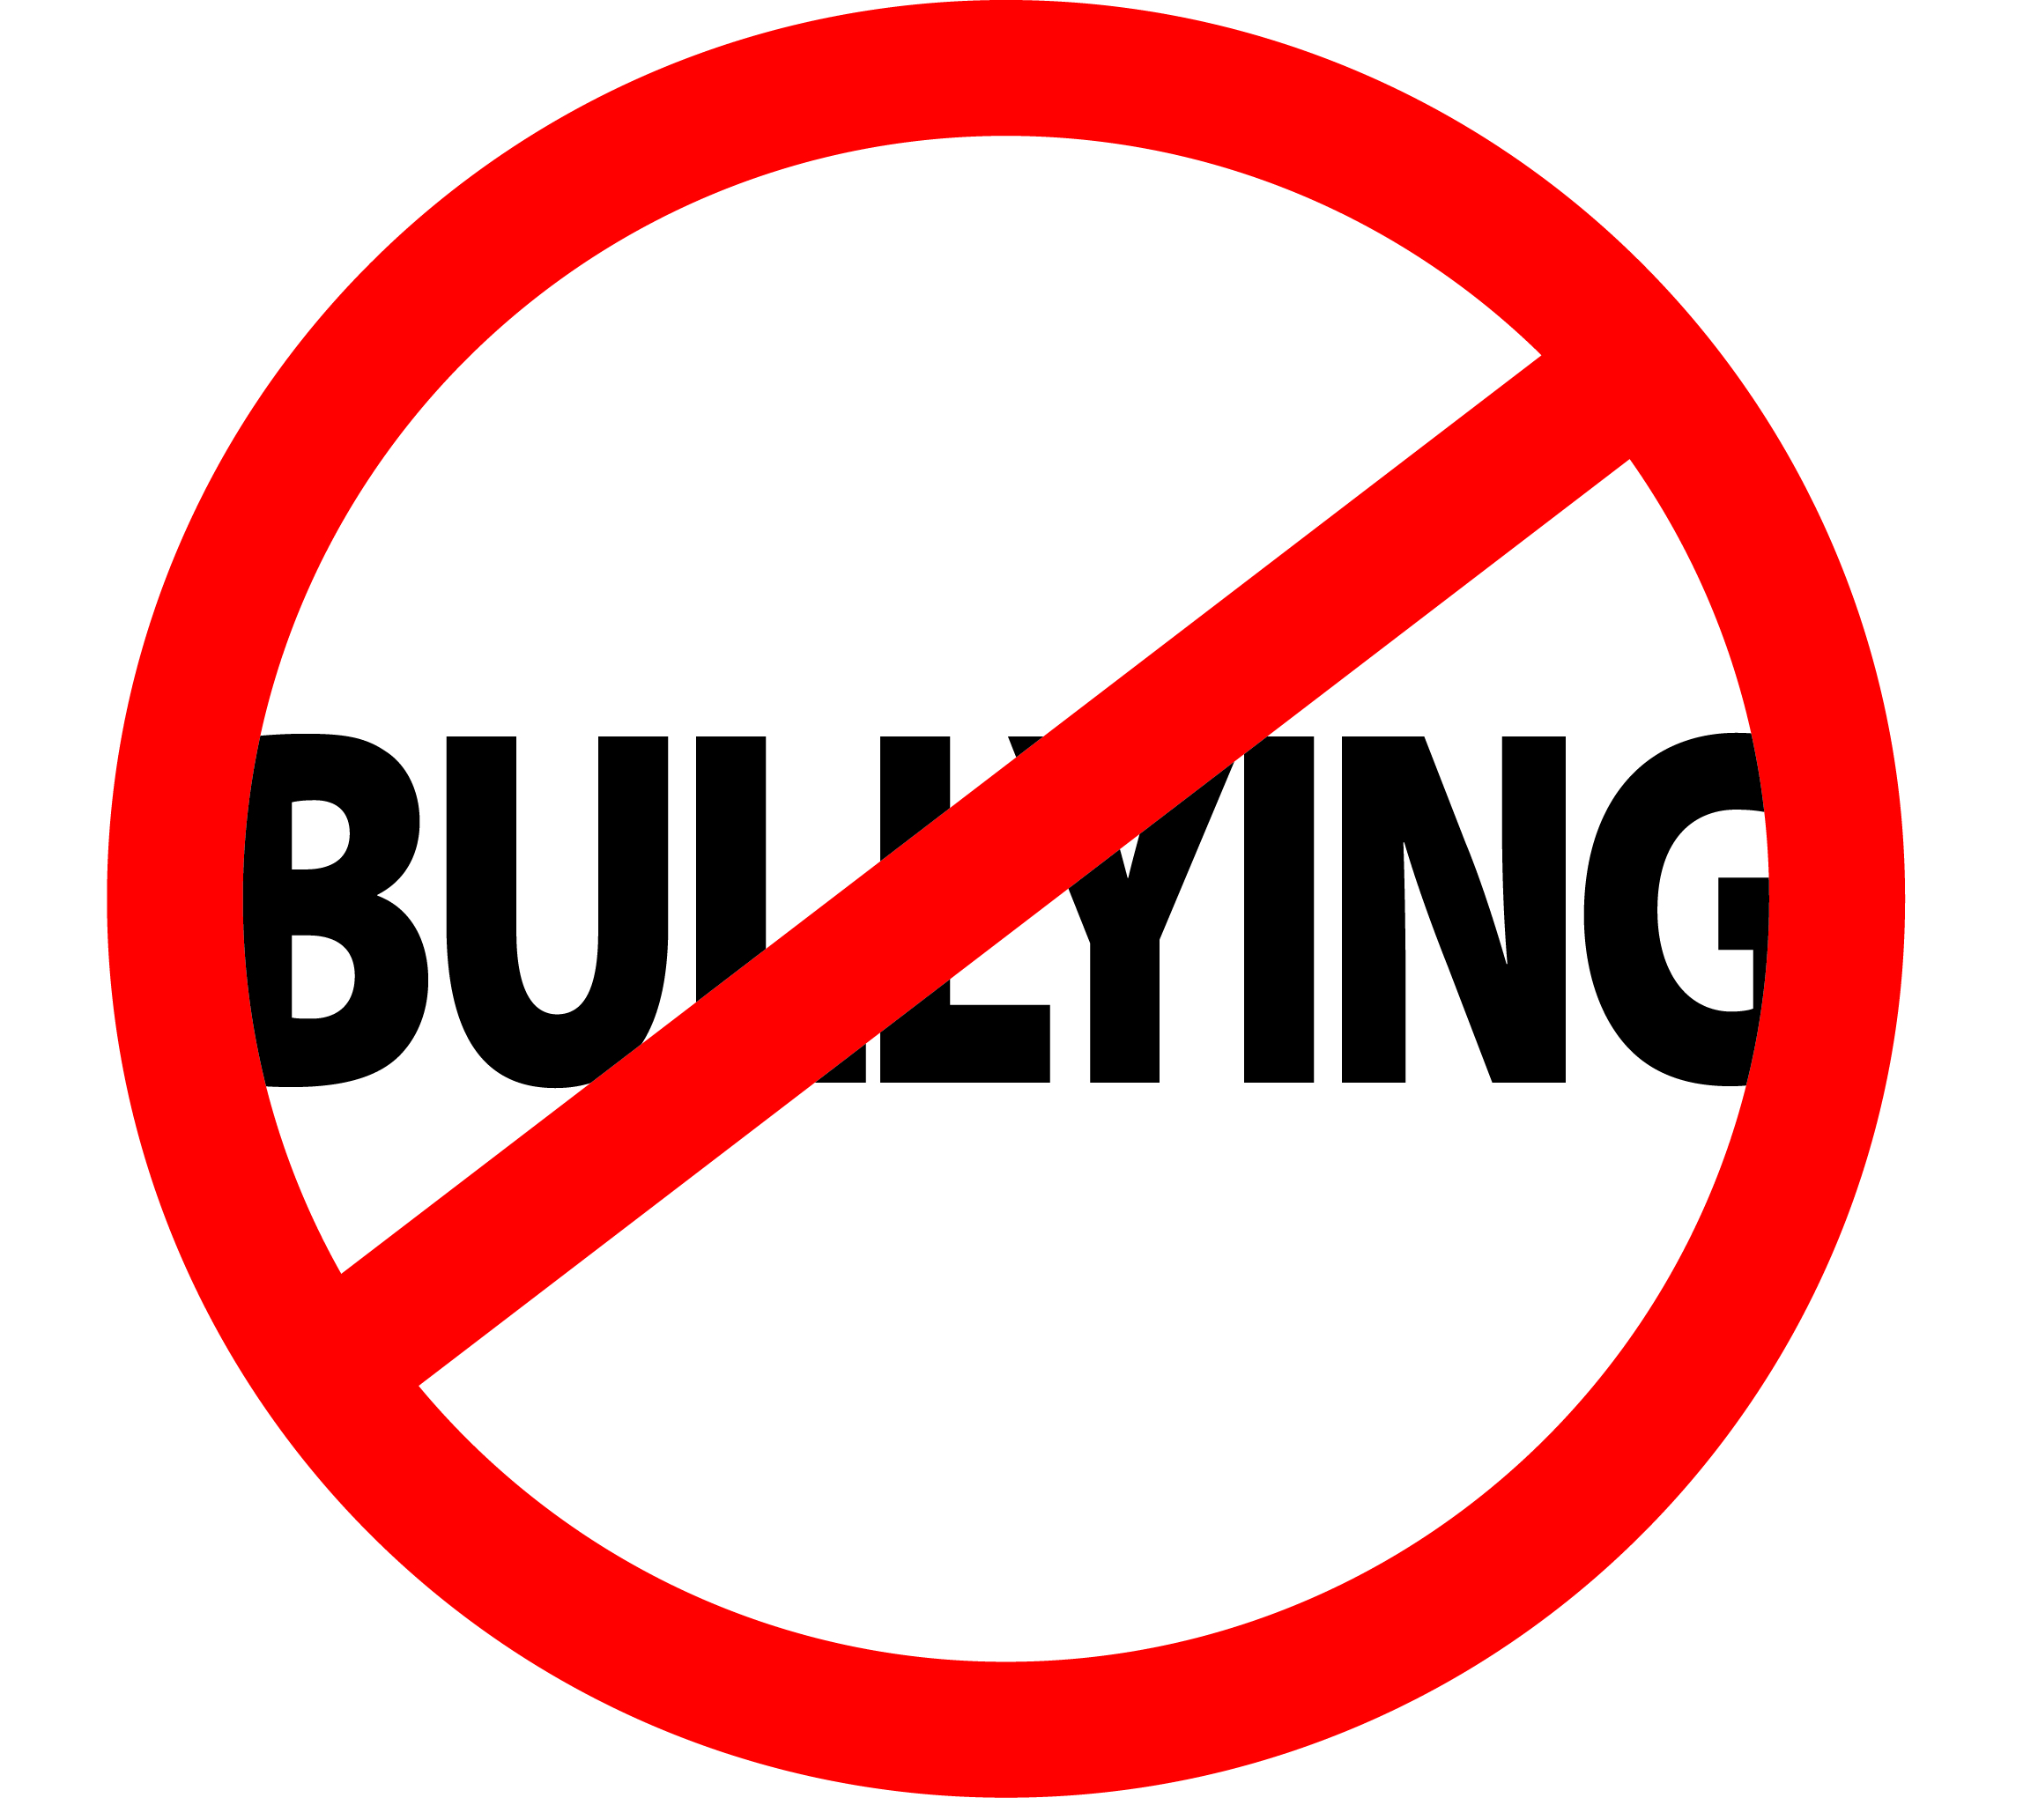 tell someone about bullying